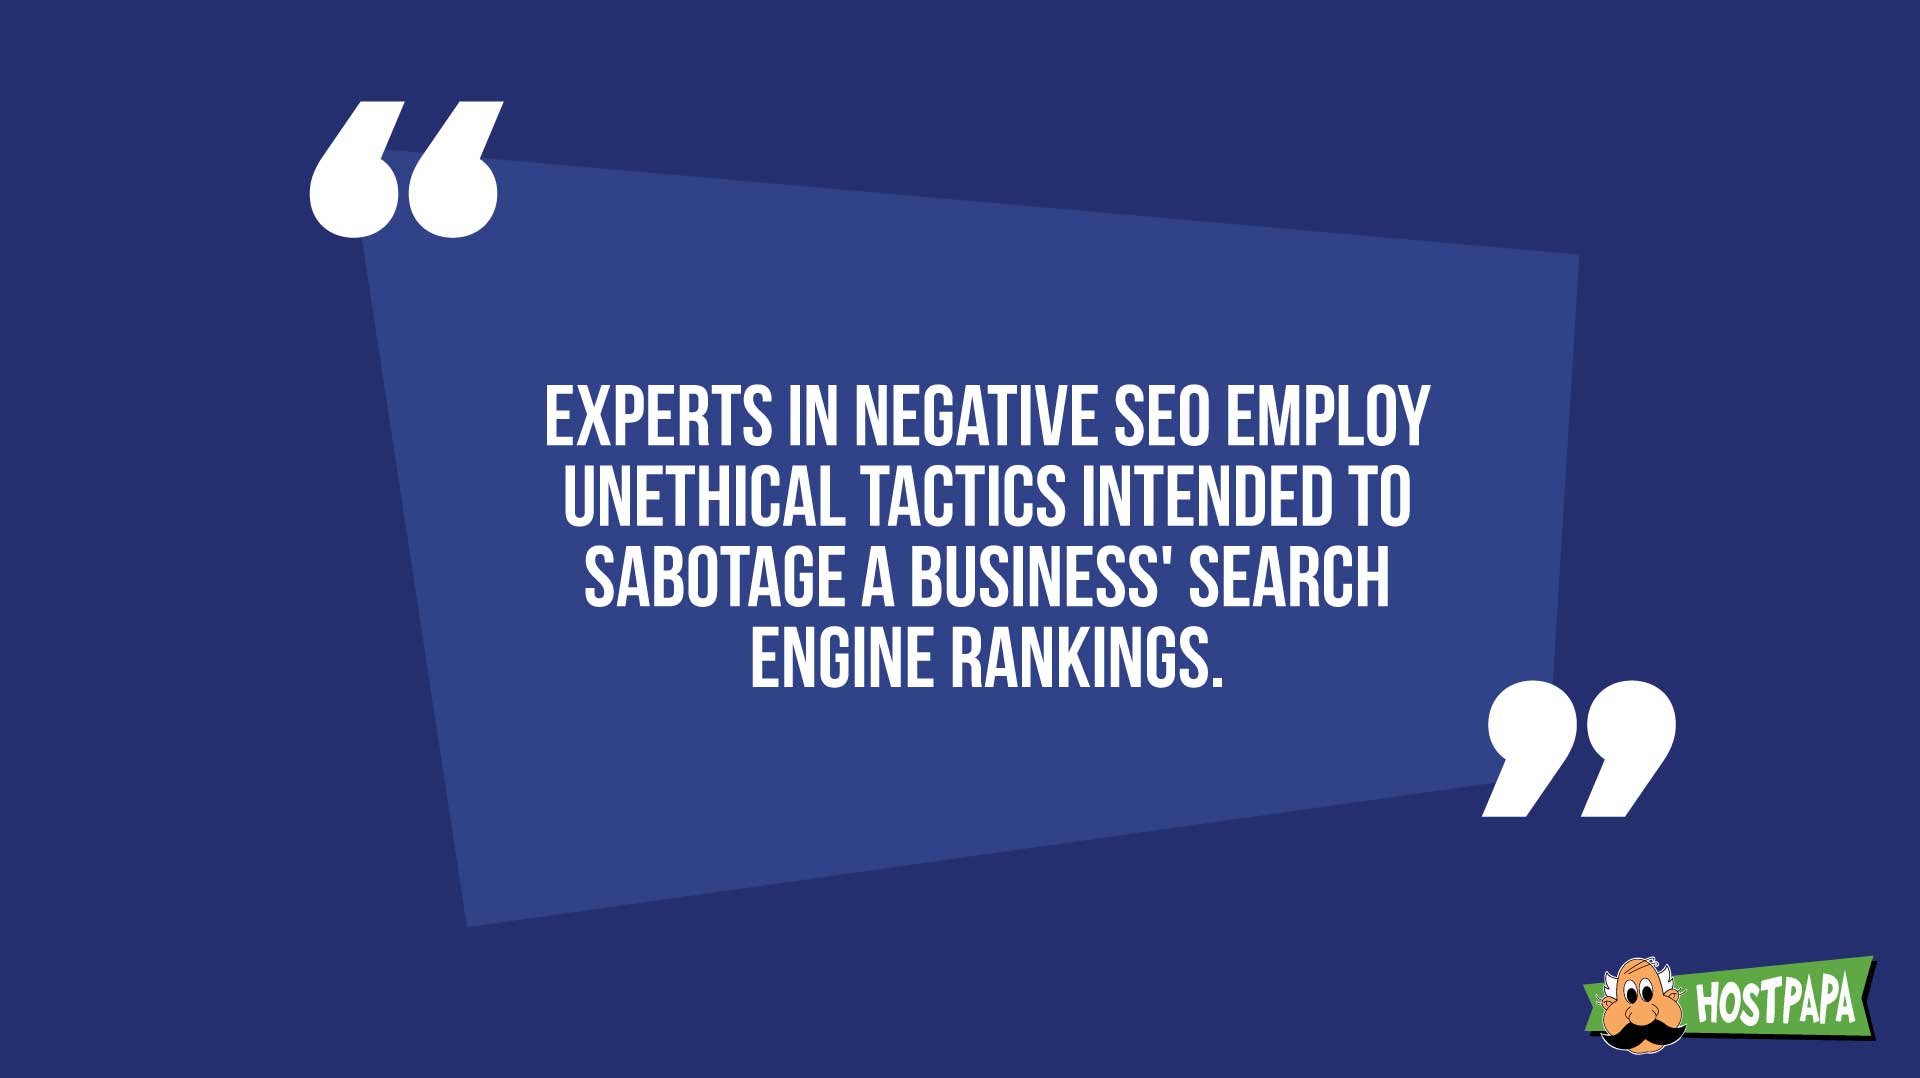 Experts in negative SEO employ unethical tactics intended to sabotage a business' search engine rankings